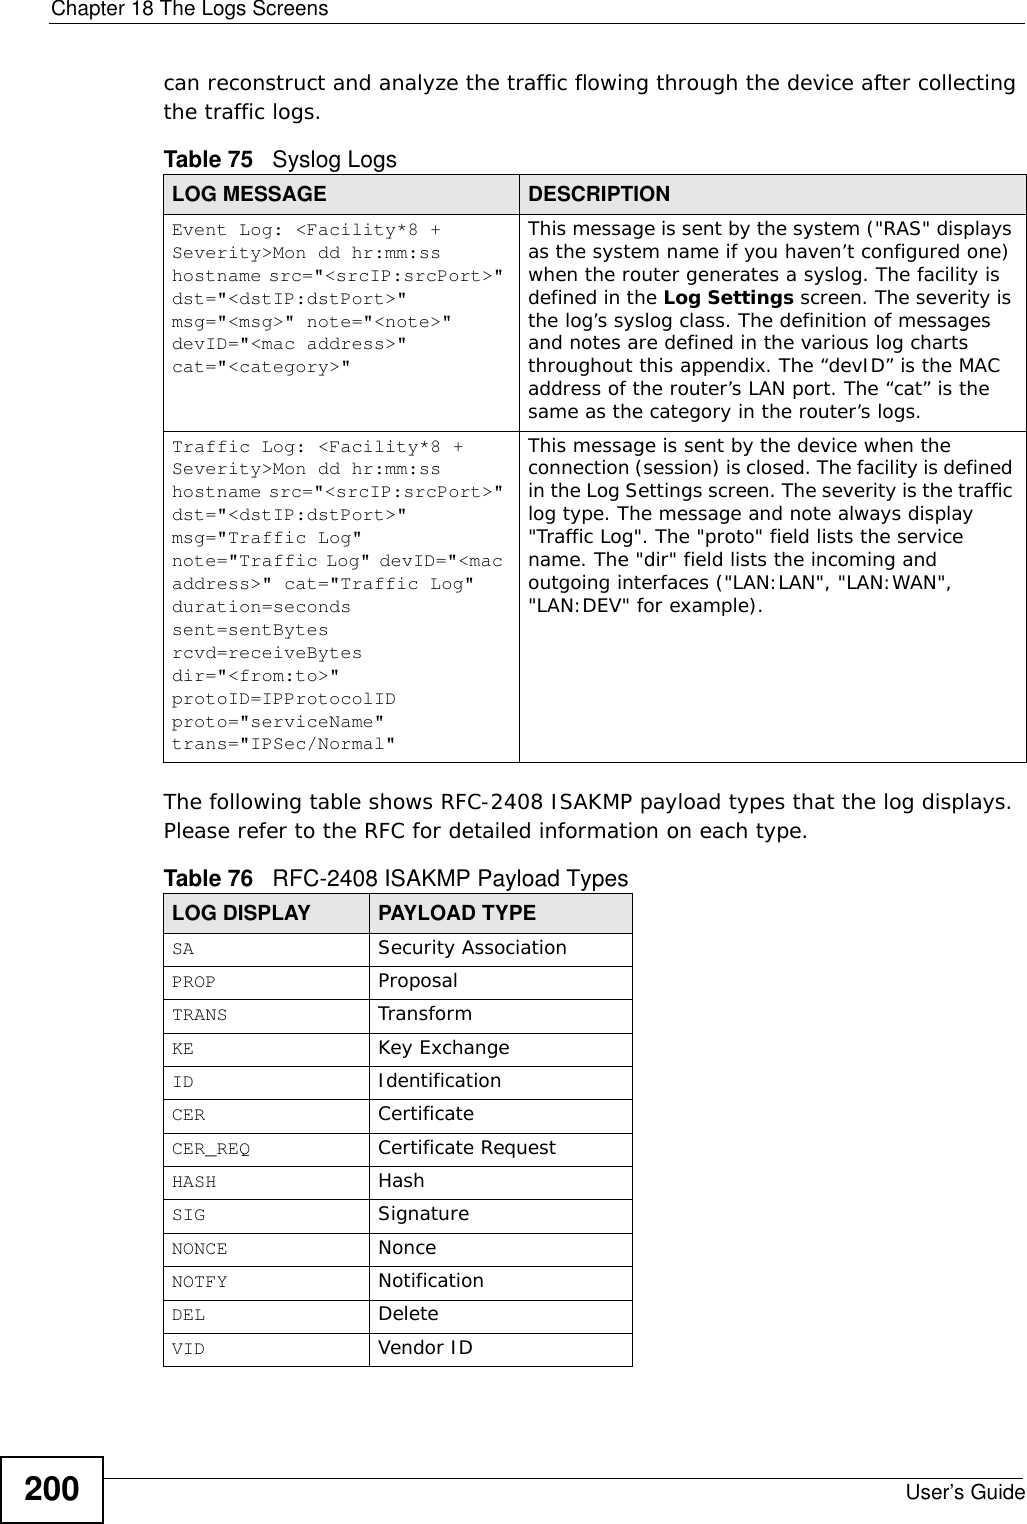 Chapter 18 The Logs ScreensUser’s Guide200can reconstruct and analyze the traffic flowing through the device after collecting the traffic logs. The following table shows RFC-2408 ISAKMP payload types that the log displays. Please refer to the RFC for detailed information on each type. Table 75   Syslog LogsLOG MESSAGE DESCRIPTIONEvent Log: &lt;Facility*8 + Severity&gt;Mon dd hr:mm:ss hostname src=&quot;&lt;srcIP:srcPort&gt;&quot; dst=&quot;&lt;dstIP:dstPort&gt;&quot; msg=&quot;&lt;msg&gt;&quot; note=&quot;&lt;note&gt;&quot; devID=&quot;&lt;mac address&gt;&quot; cat=&quot;&lt;category&gt;&quot;This message is sent by the system (&quot;RAS&quot; displays as the system name if you haven’t configured one) when the router generates a syslog. The facility is defined in the Log Settings screen. The severity is the log’s syslog class. The definition of messages and notes are defined in the various log charts throughout this appendix. The “devID” is the MAC address of the router’s LAN port. The “cat” is the same as the category in the router’s logs.Traffic Log: &lt;Facility*8 + Severity&gt;Mon dd hr:mm:ss hostname src=&quot;&lt;srcIP:srcPort&gt;&quot; dst=&quot;&lt;dstIP:dstPort&gt;&quot; msg=&quot;Traffic Log&quot; note=&quot;Traffic Log&quot; devID=&quot;&lt;mac address&gt;&quot; cat=&quot;Traffic Log&quot; duration=seconds sent=sentBytes rcvd=receiveBytes dir=&quot;&lt;from:to&gt;&quot; protoID=IPProtocolID proto=&quot;serviceName&quot; trans=&quot;IPSec/Normal&quot;This message is sent by the device when the connection (session) is closed. The facility is defined in the Log Settings screen. The severity is the traffic log type. The message and note always display &quot;Traffic Log&quot;. The &quot;proto&quot; field lists the service name. The &quot;dir&quot; field lists the incoming and outgoing interfaces (&quot;LAN:LAN&quot;, &quot;LAN:WAN&quot;,  &quot;LAN:DEV&quot; for example).Table 76   RFC-2408 ISAKMP Payload TypesLOG DISPLAY PAYLOAD TYPESA Security AssociationPROP ProposalTRANS TransformKE Key ExchangeID IdentificationCER CertificateCER_REQ Certificate RequestHASH HashSIG SignatureNONCE NonceNOTFY NotificationDEL DeleteVID Vendor ID